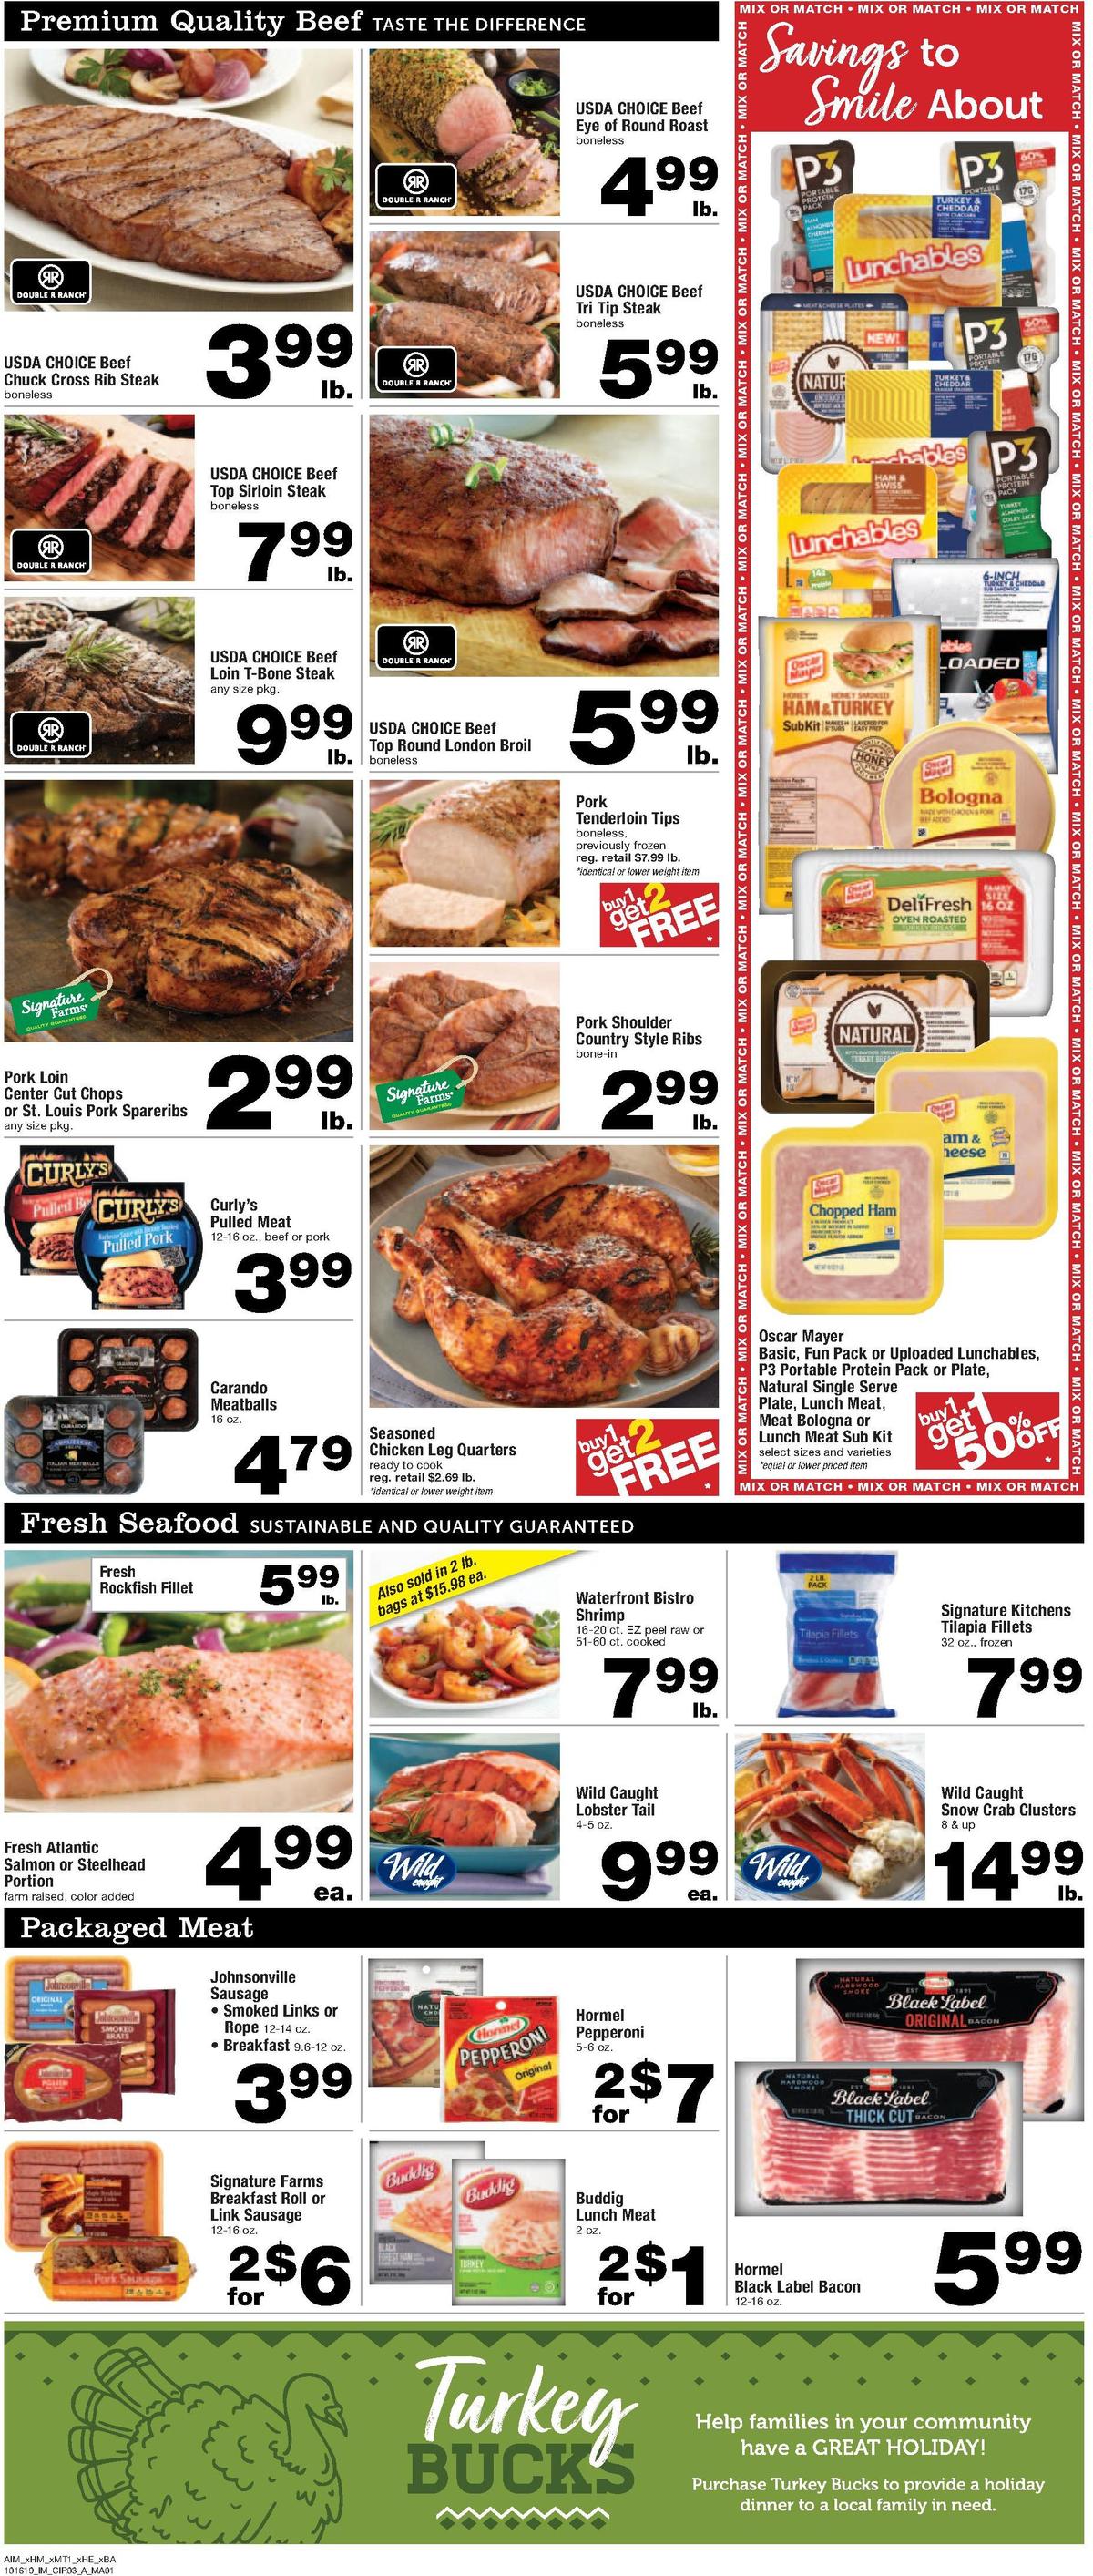 Albertsons Weekly Ad from October 16